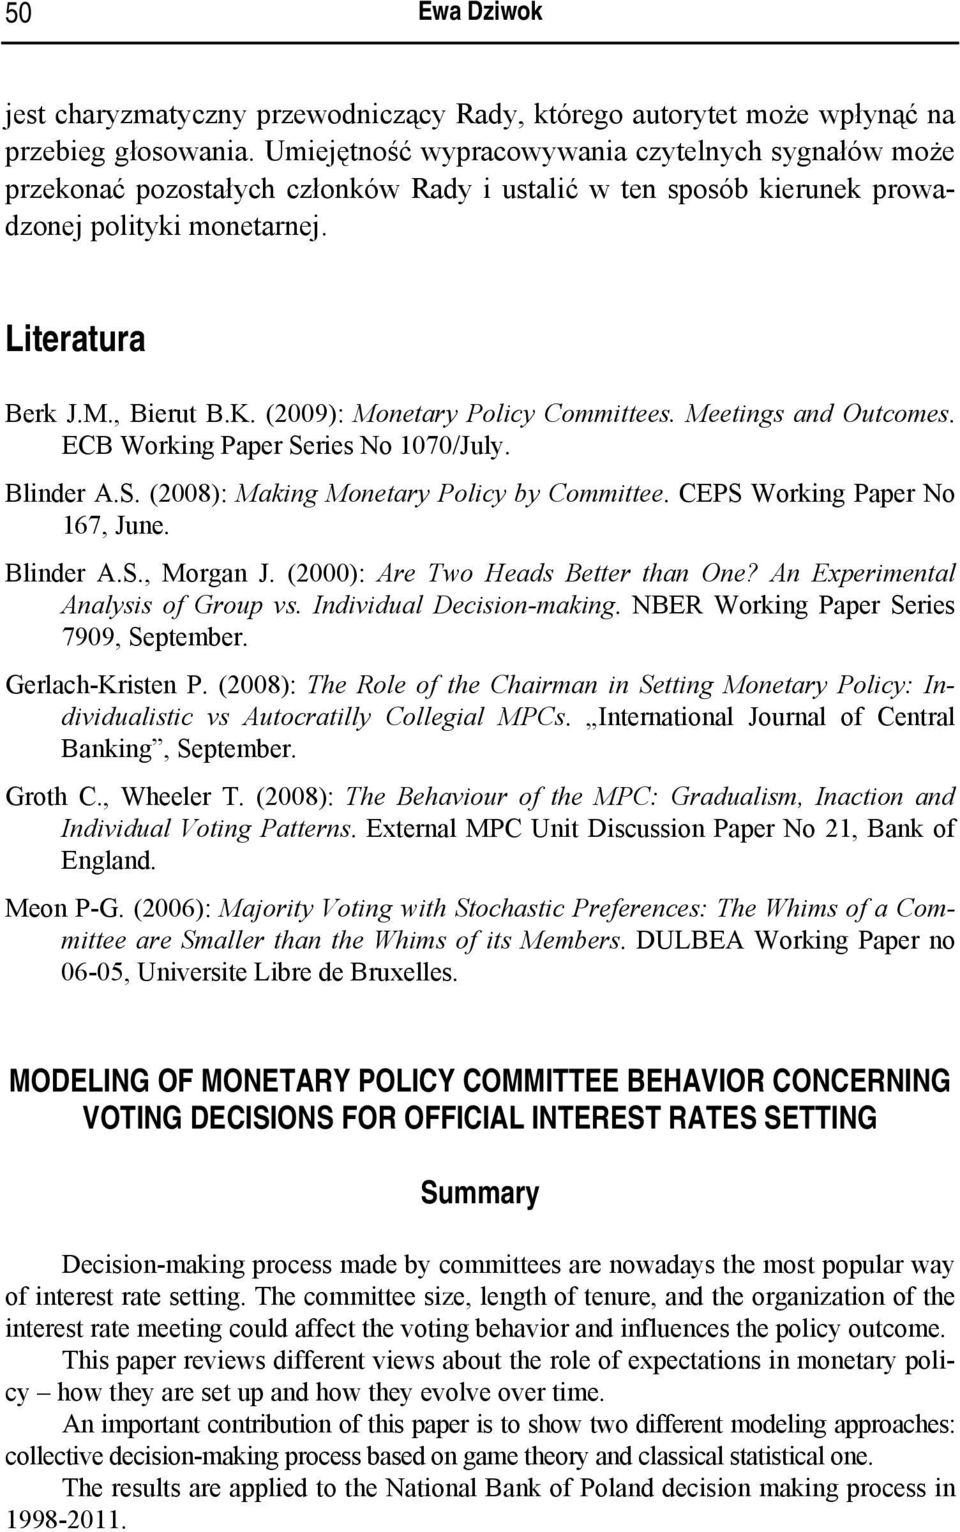 (2009): Monetary Polcy Commttees. Meetngs and Outcomes. ECB Workng Paper Seres No 1070/July. Blnder A.S. (2008): Makng Monetary Polcy by Commttee. CEPS Workng Paper No 167, June. Blnder A.S., Morgan J.